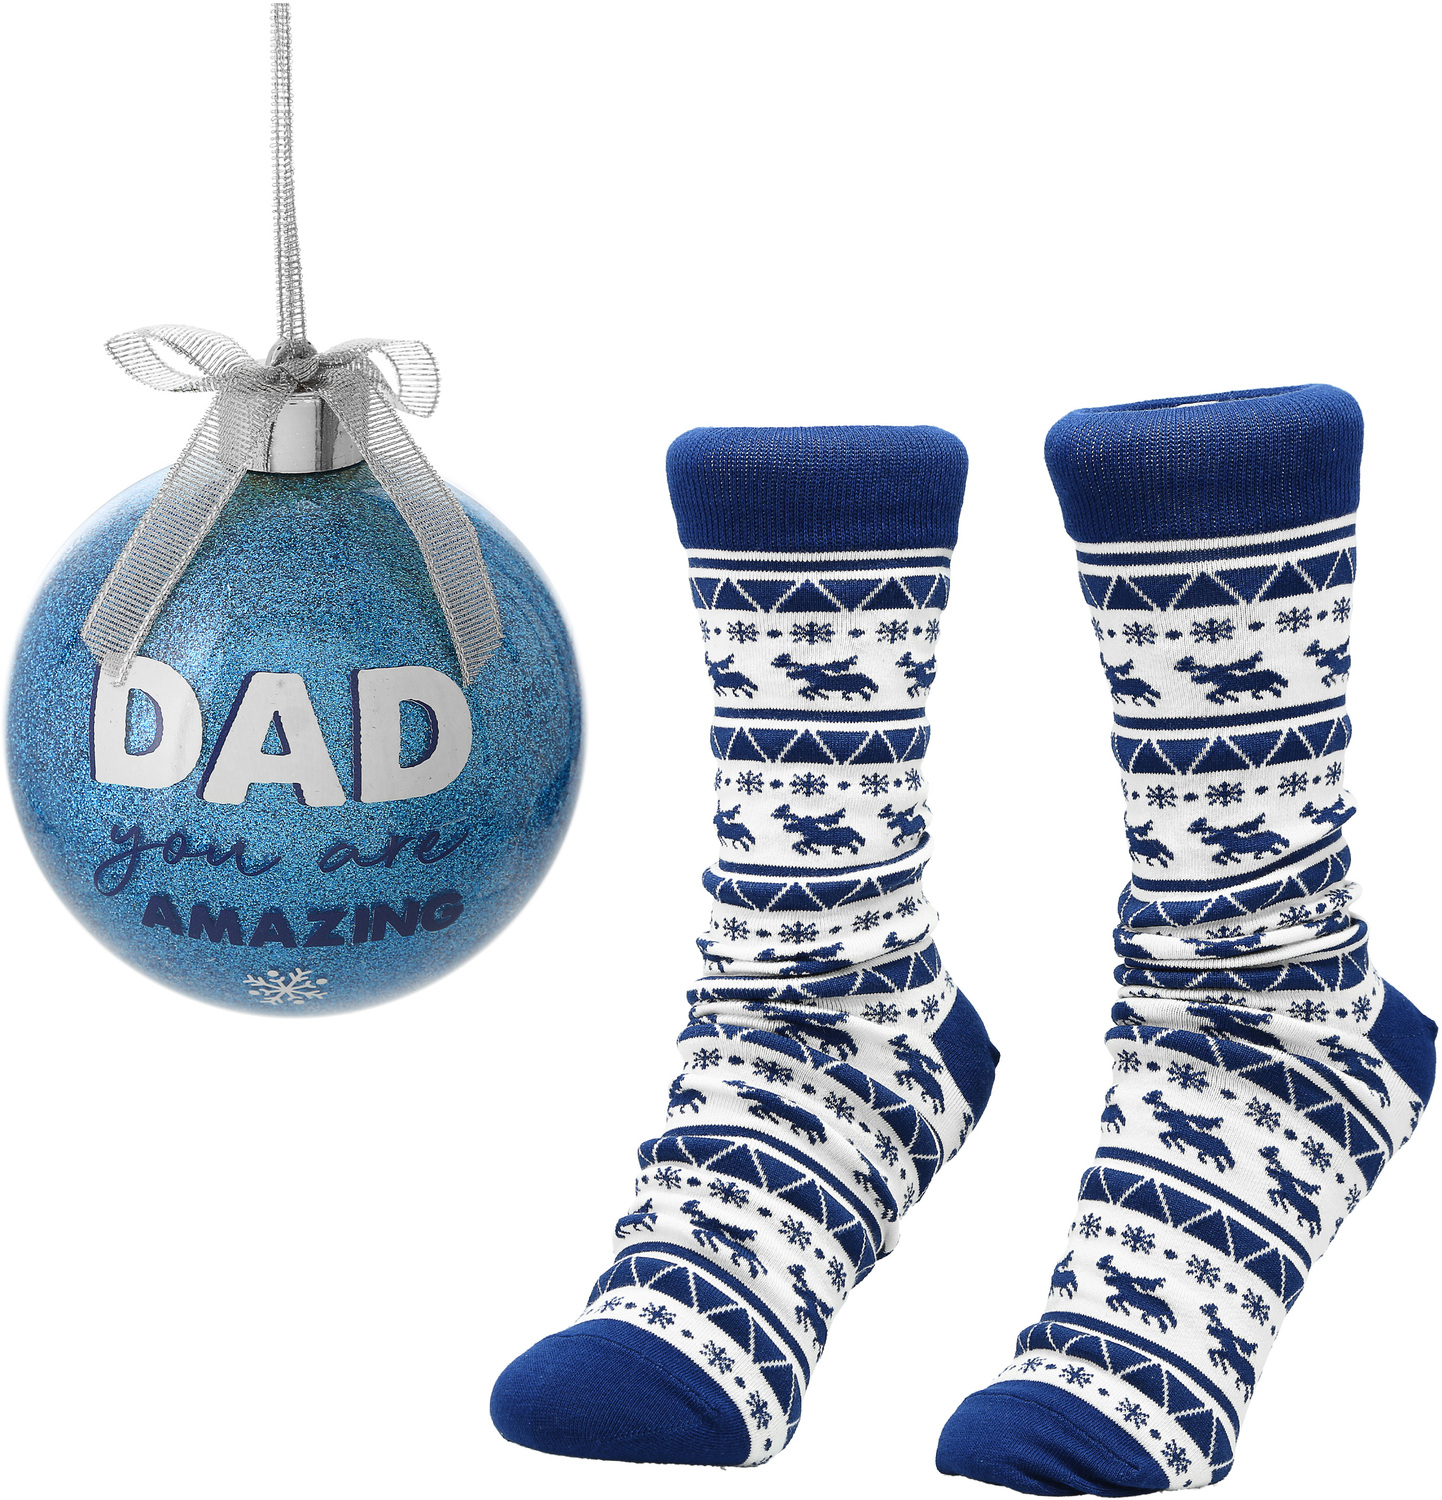 Dad by Warm & Toe-sty - Dad - 4" Ornament with Unisex Holiday Socks